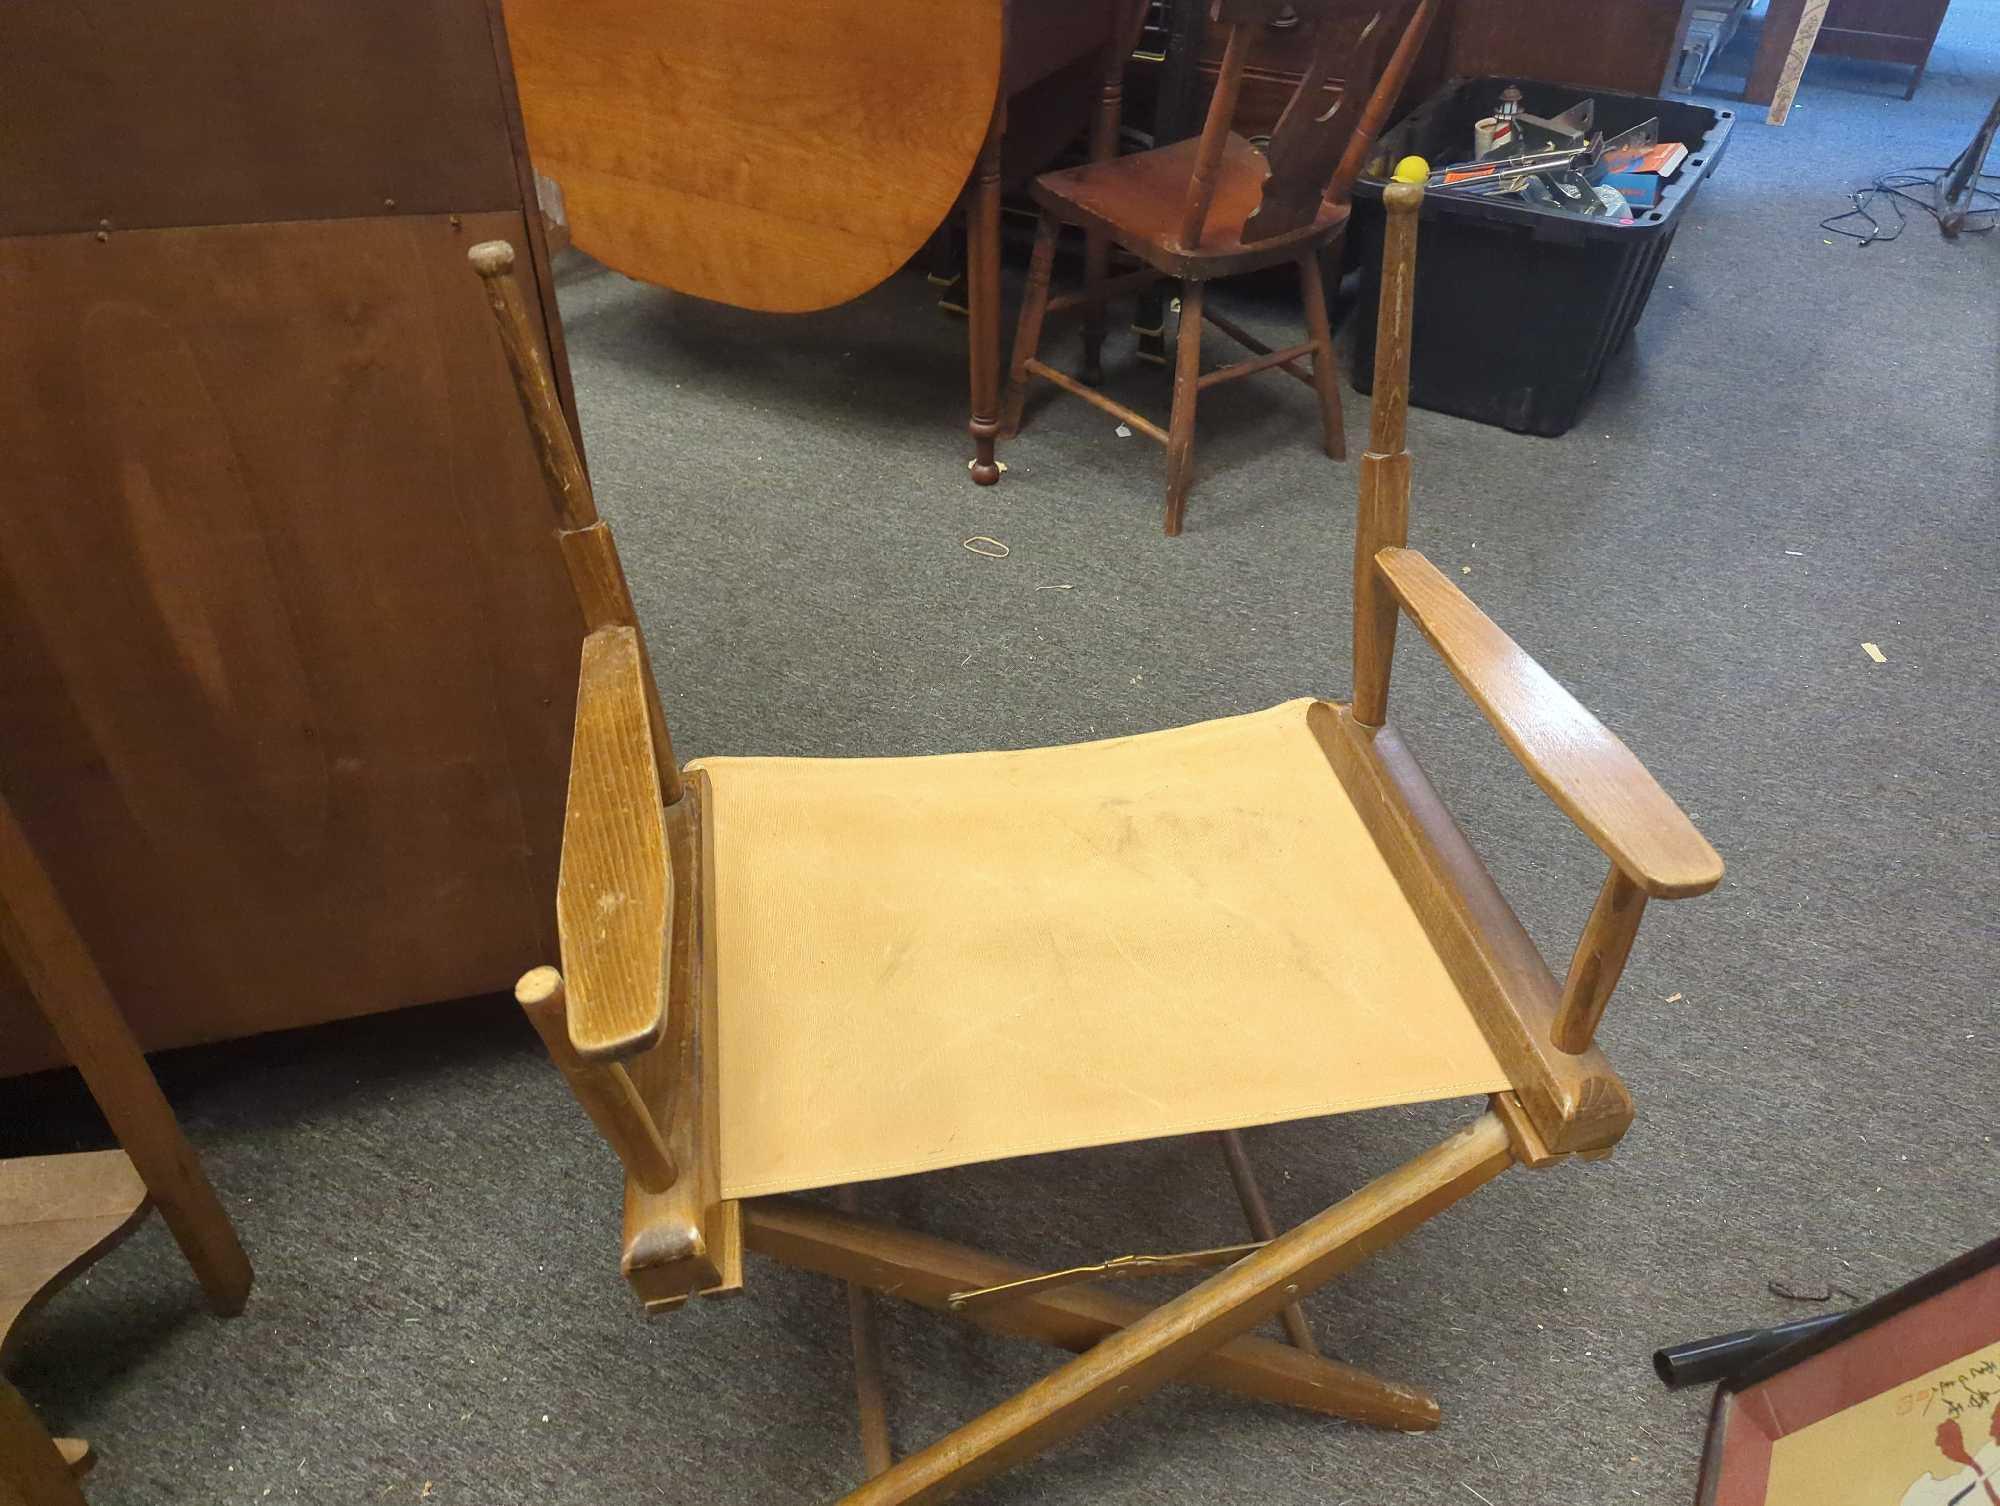 Folding Wood Directors Chair, Missing Top Canvas Piece, Approximate Dimensions - 32" H x 25" W x 17"